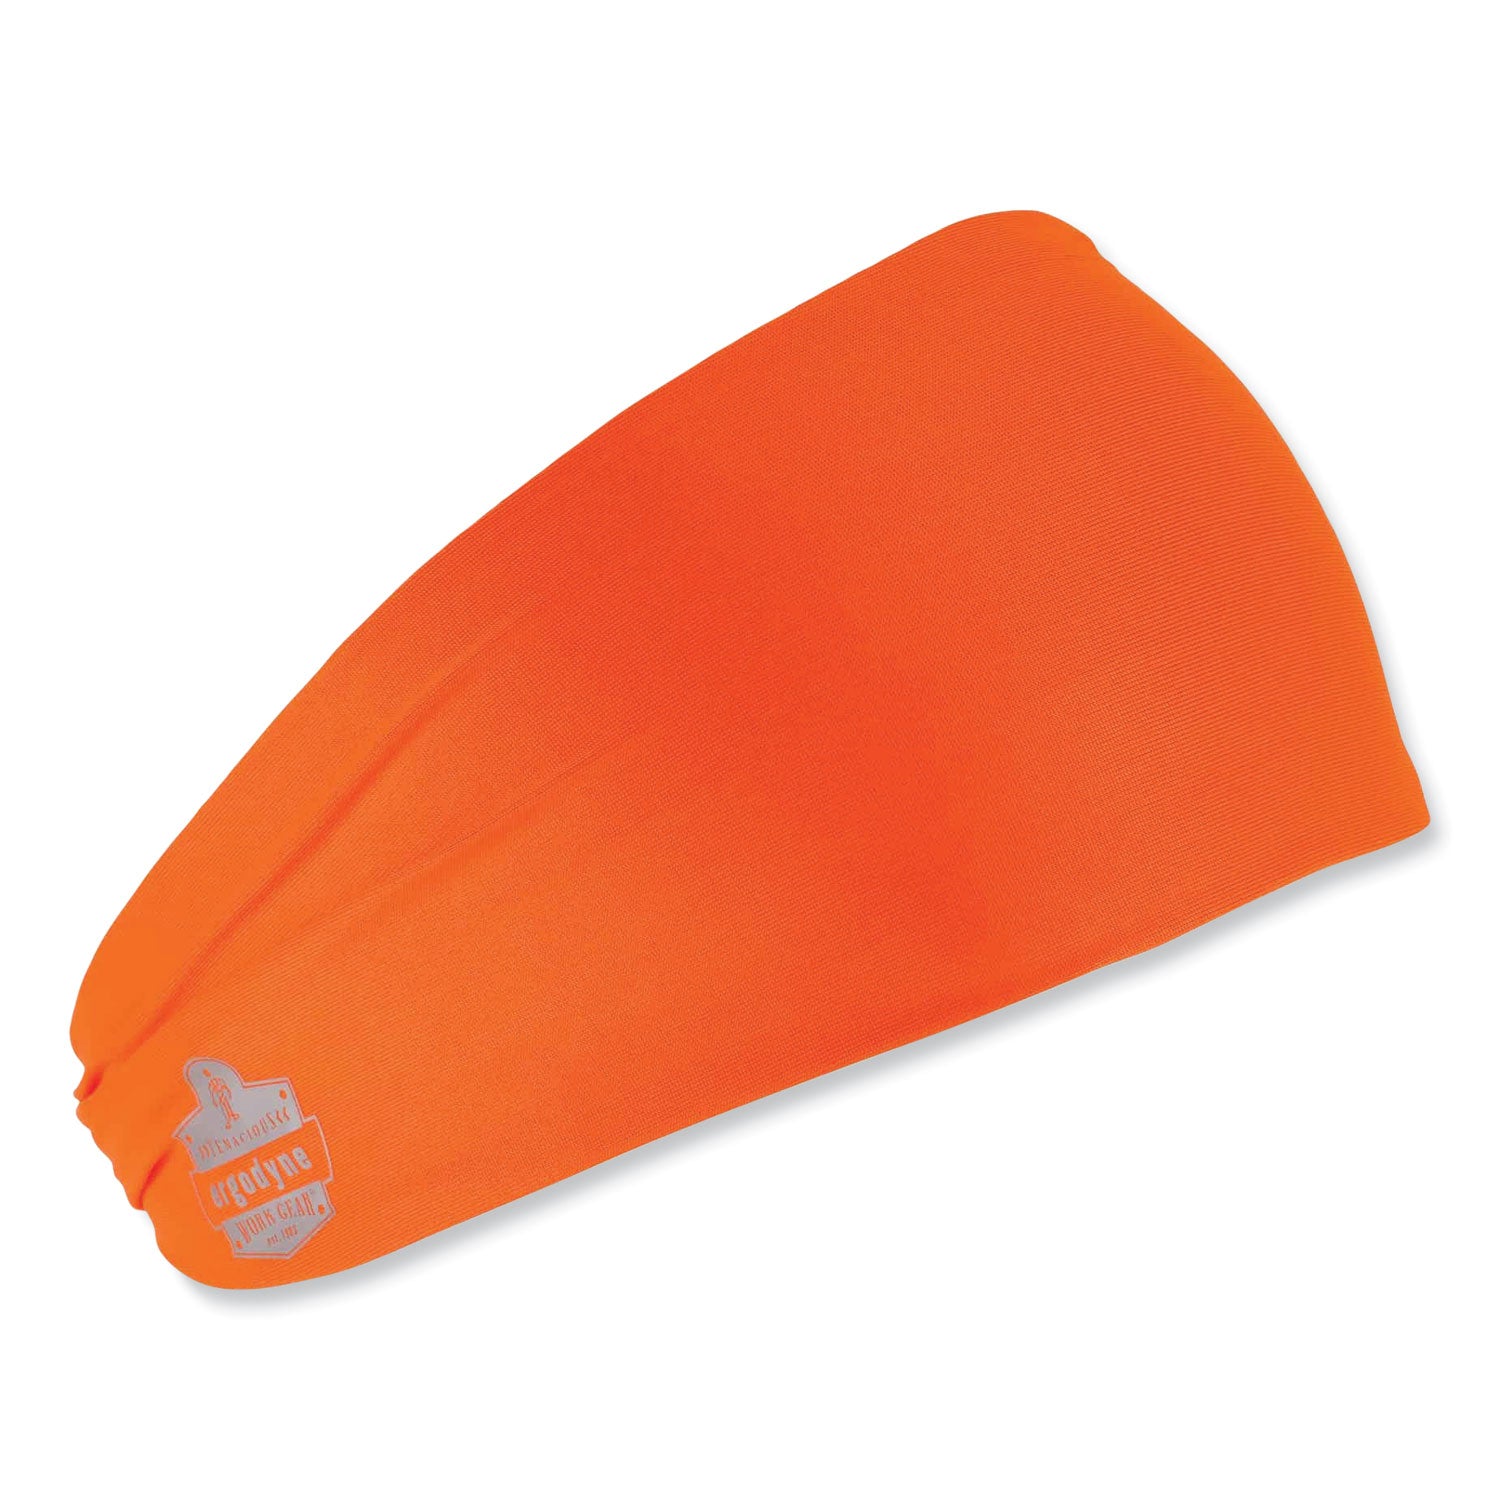 chill-its-6634-performance-knit-cooling-headband-polyester-spandex-one-size-fits-most-orange-ships-in-1-3-business-days_ego12704 - 1